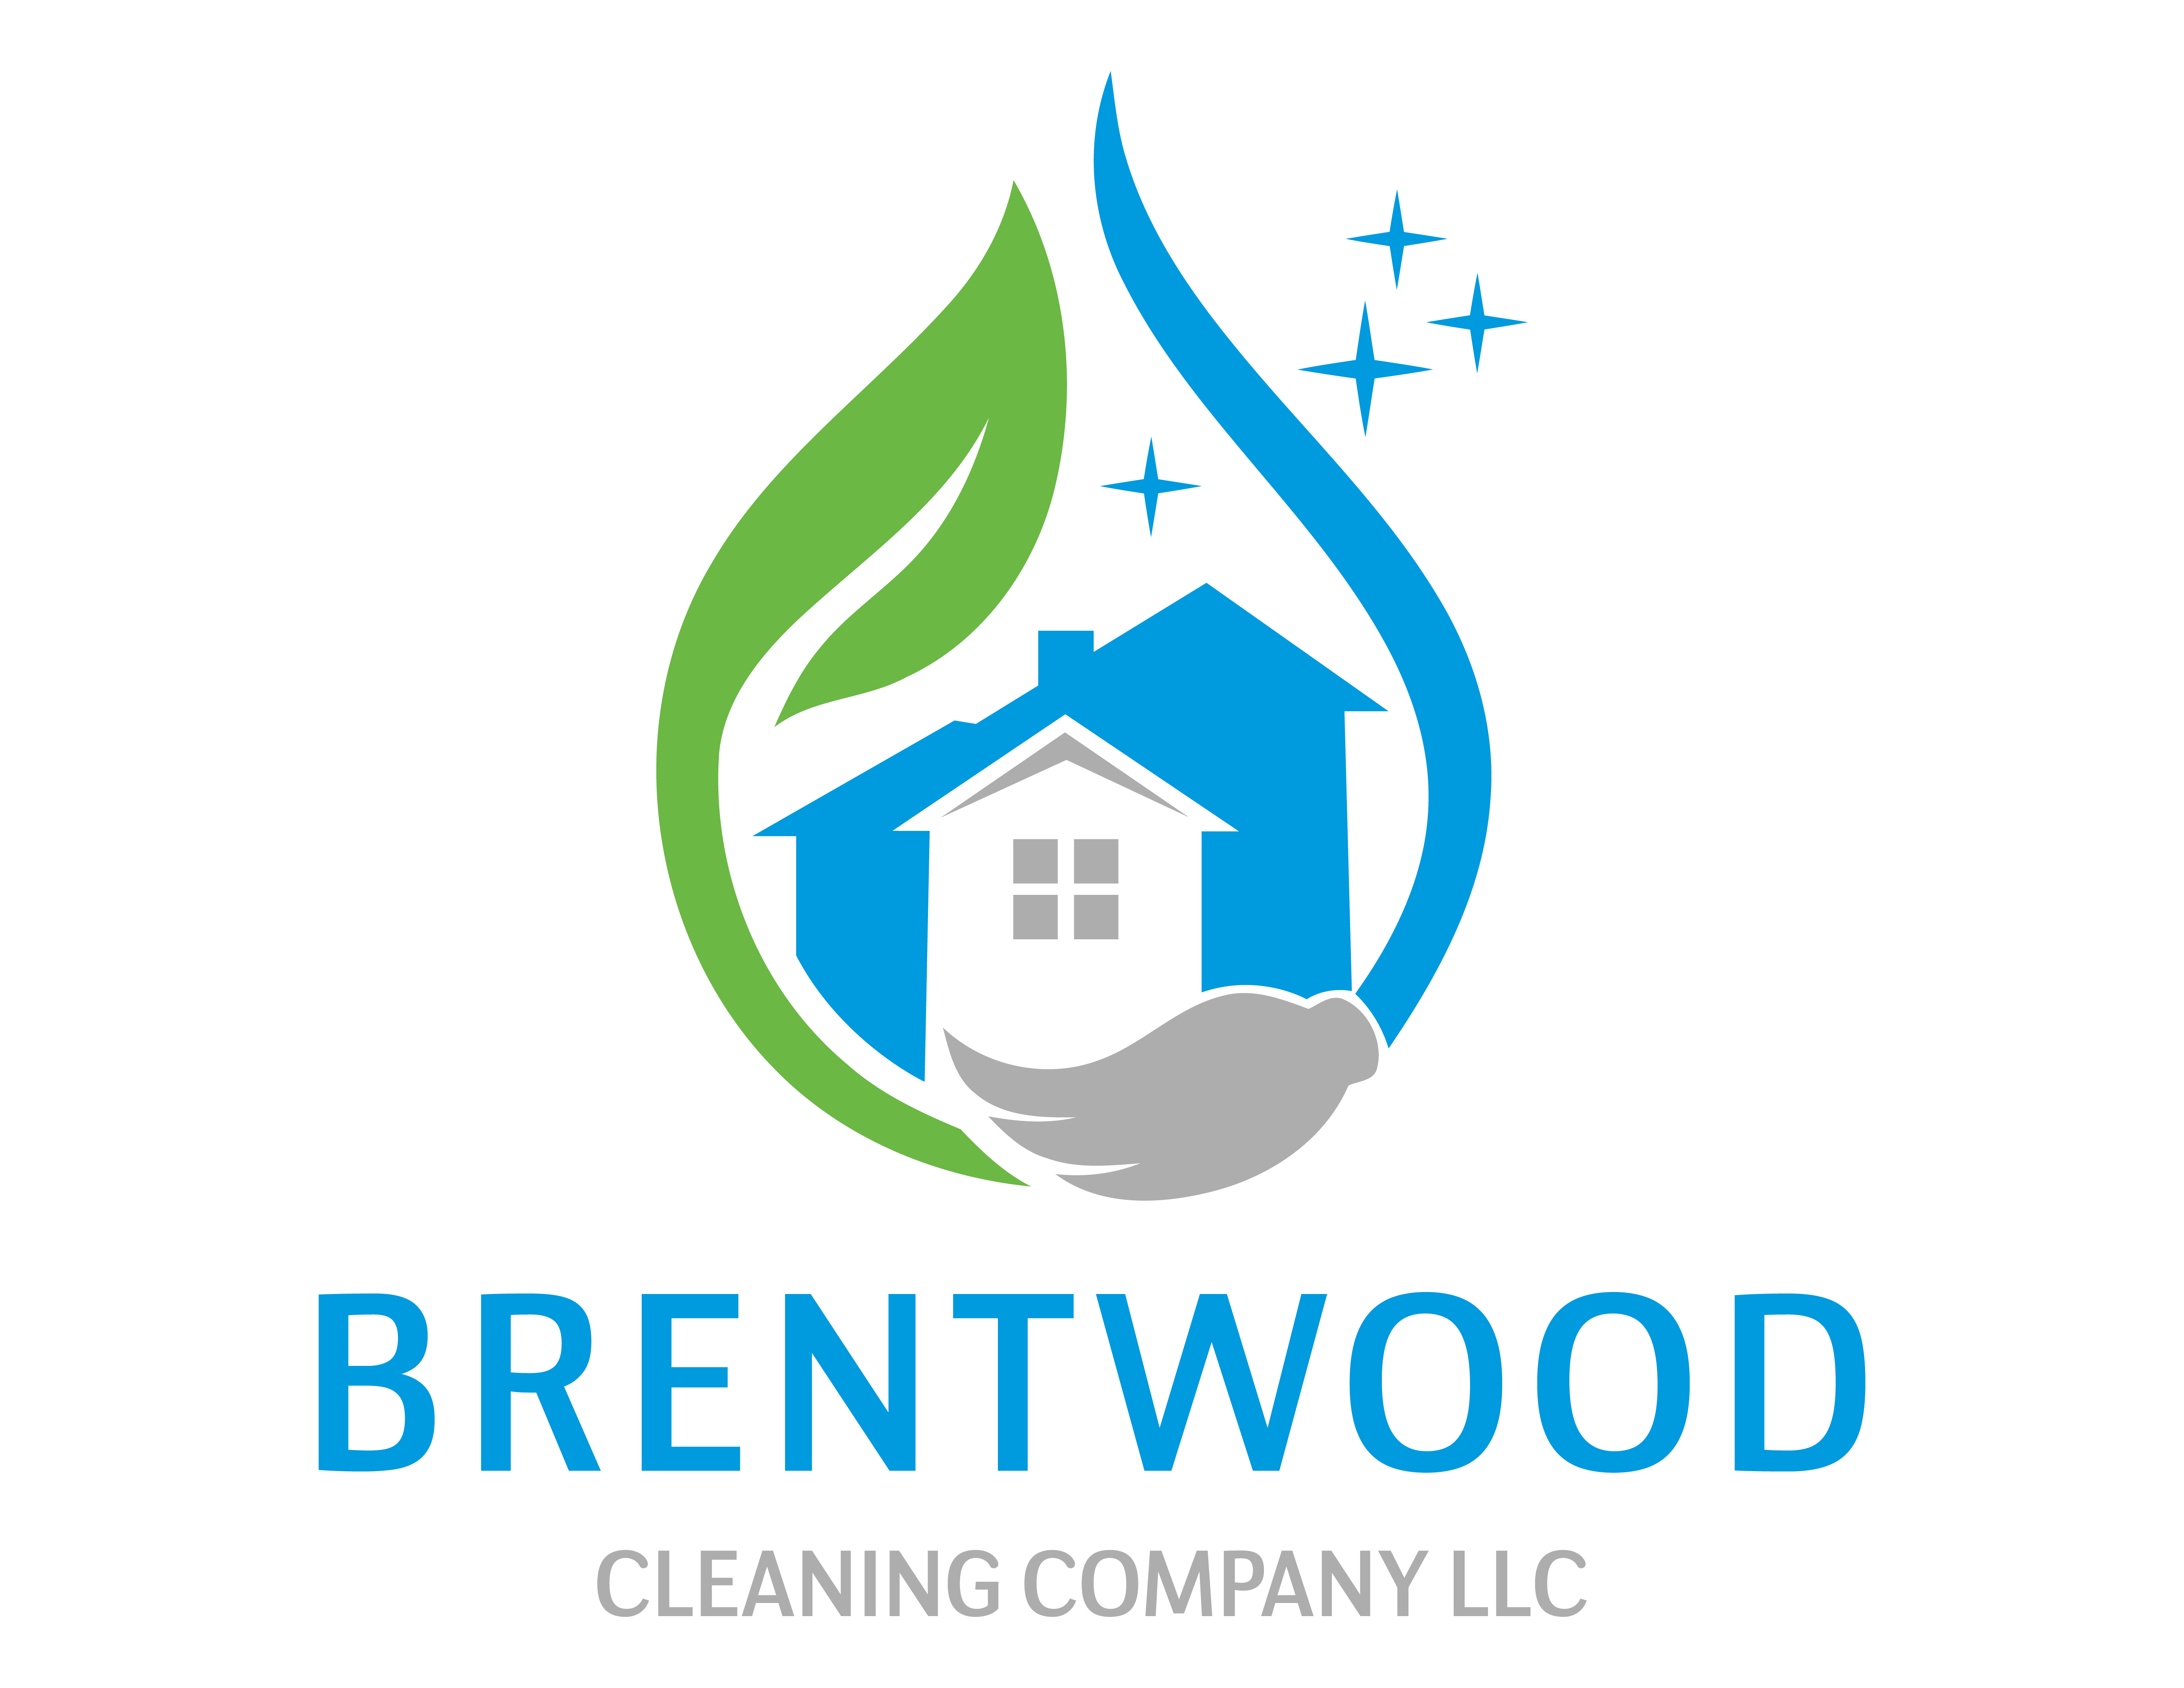 Brentwood Cleaning Company